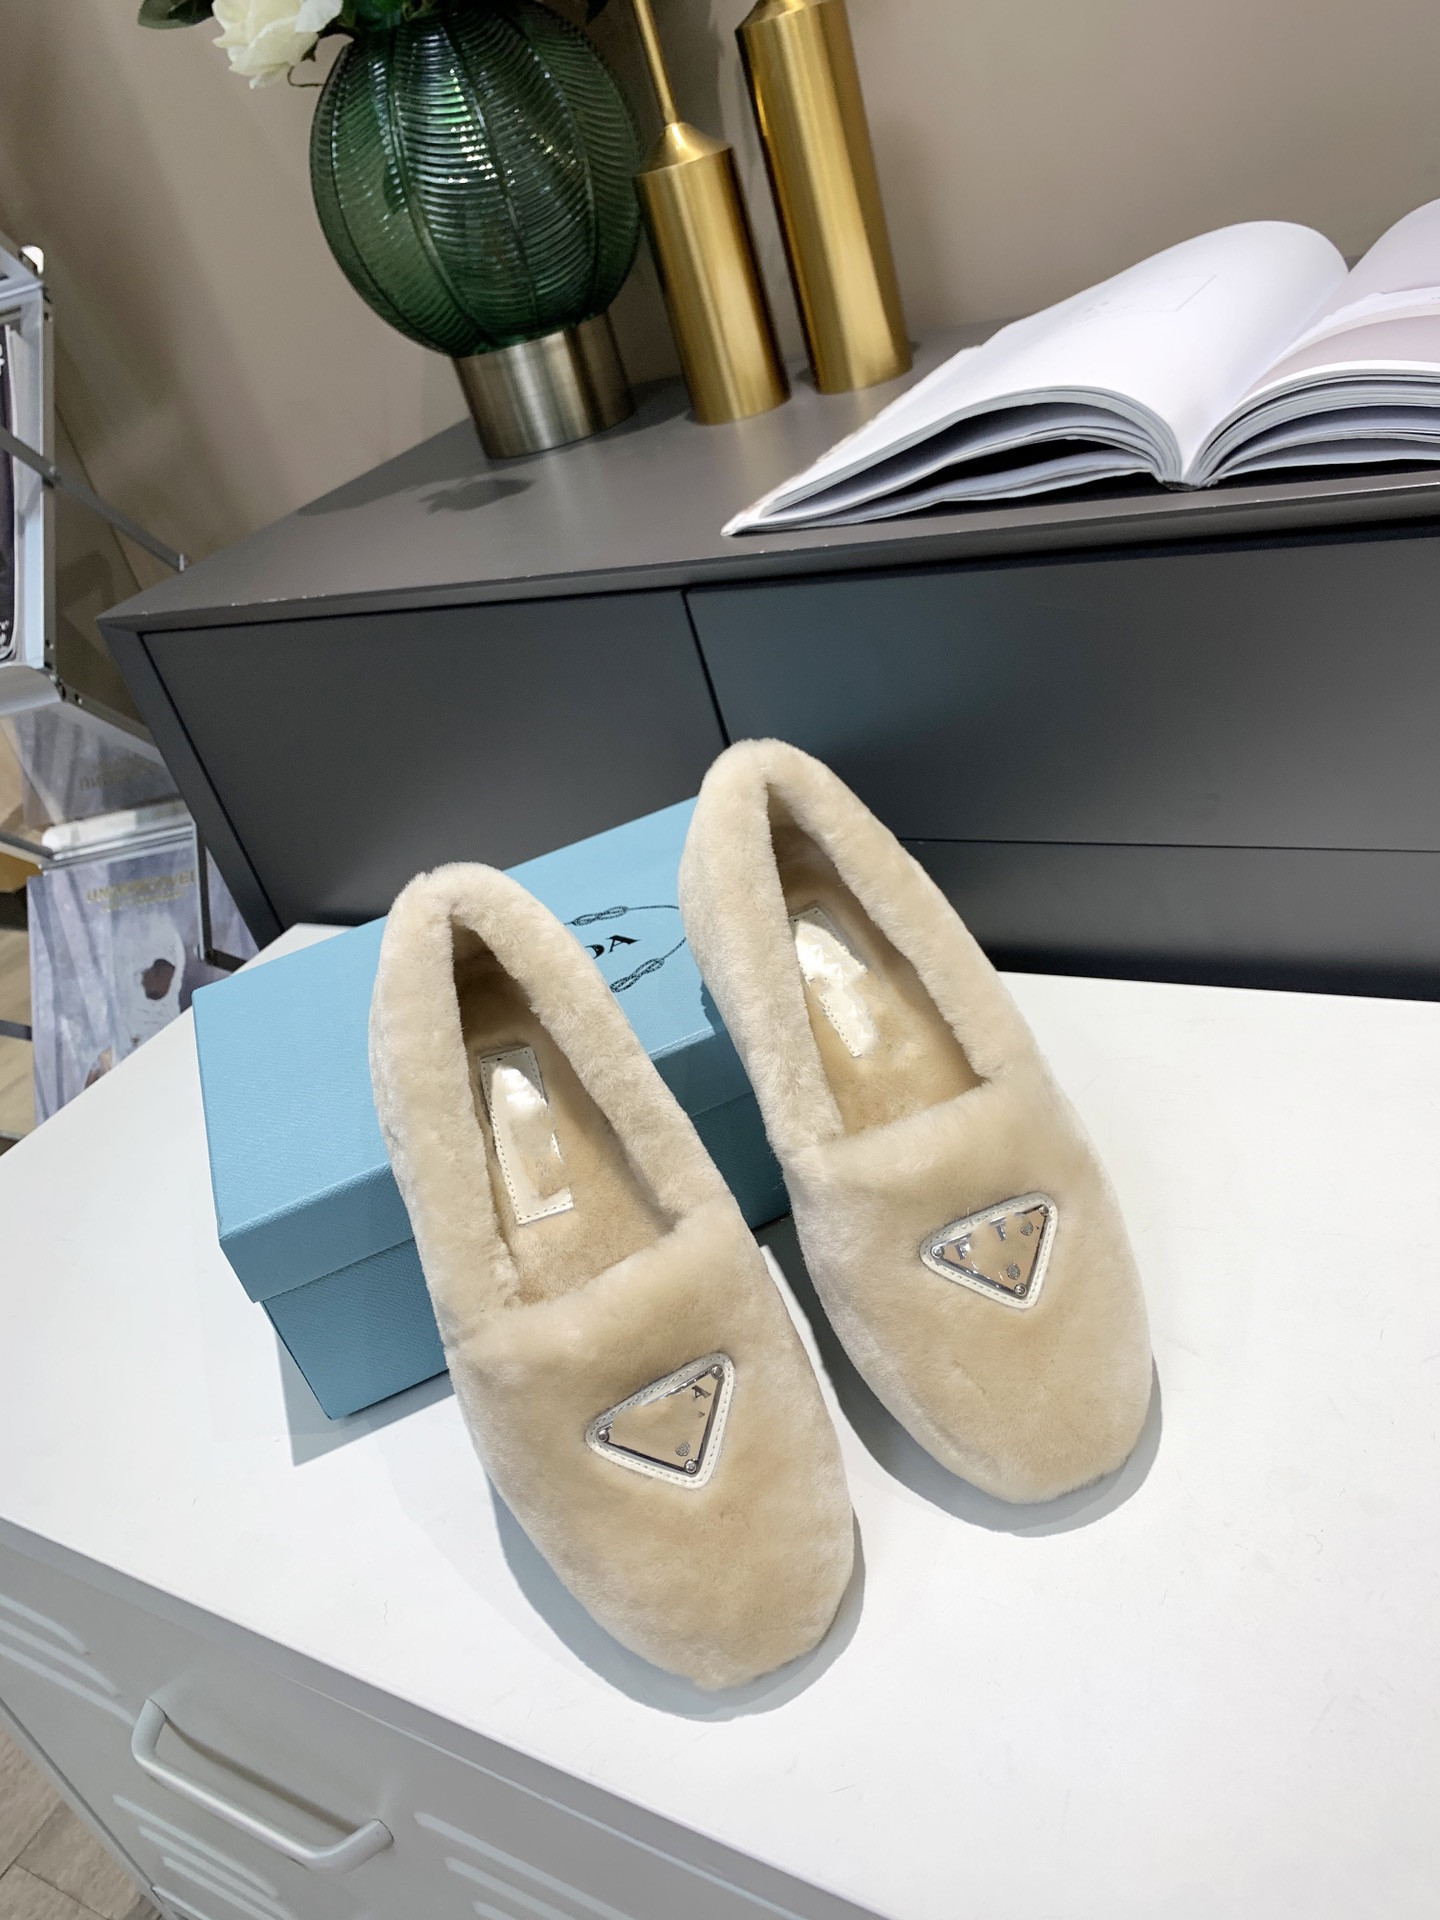 

newest women designer slippers brand logo sandals Lamb original edition all details very comfort luxury high quality size for 35-41, Khaki